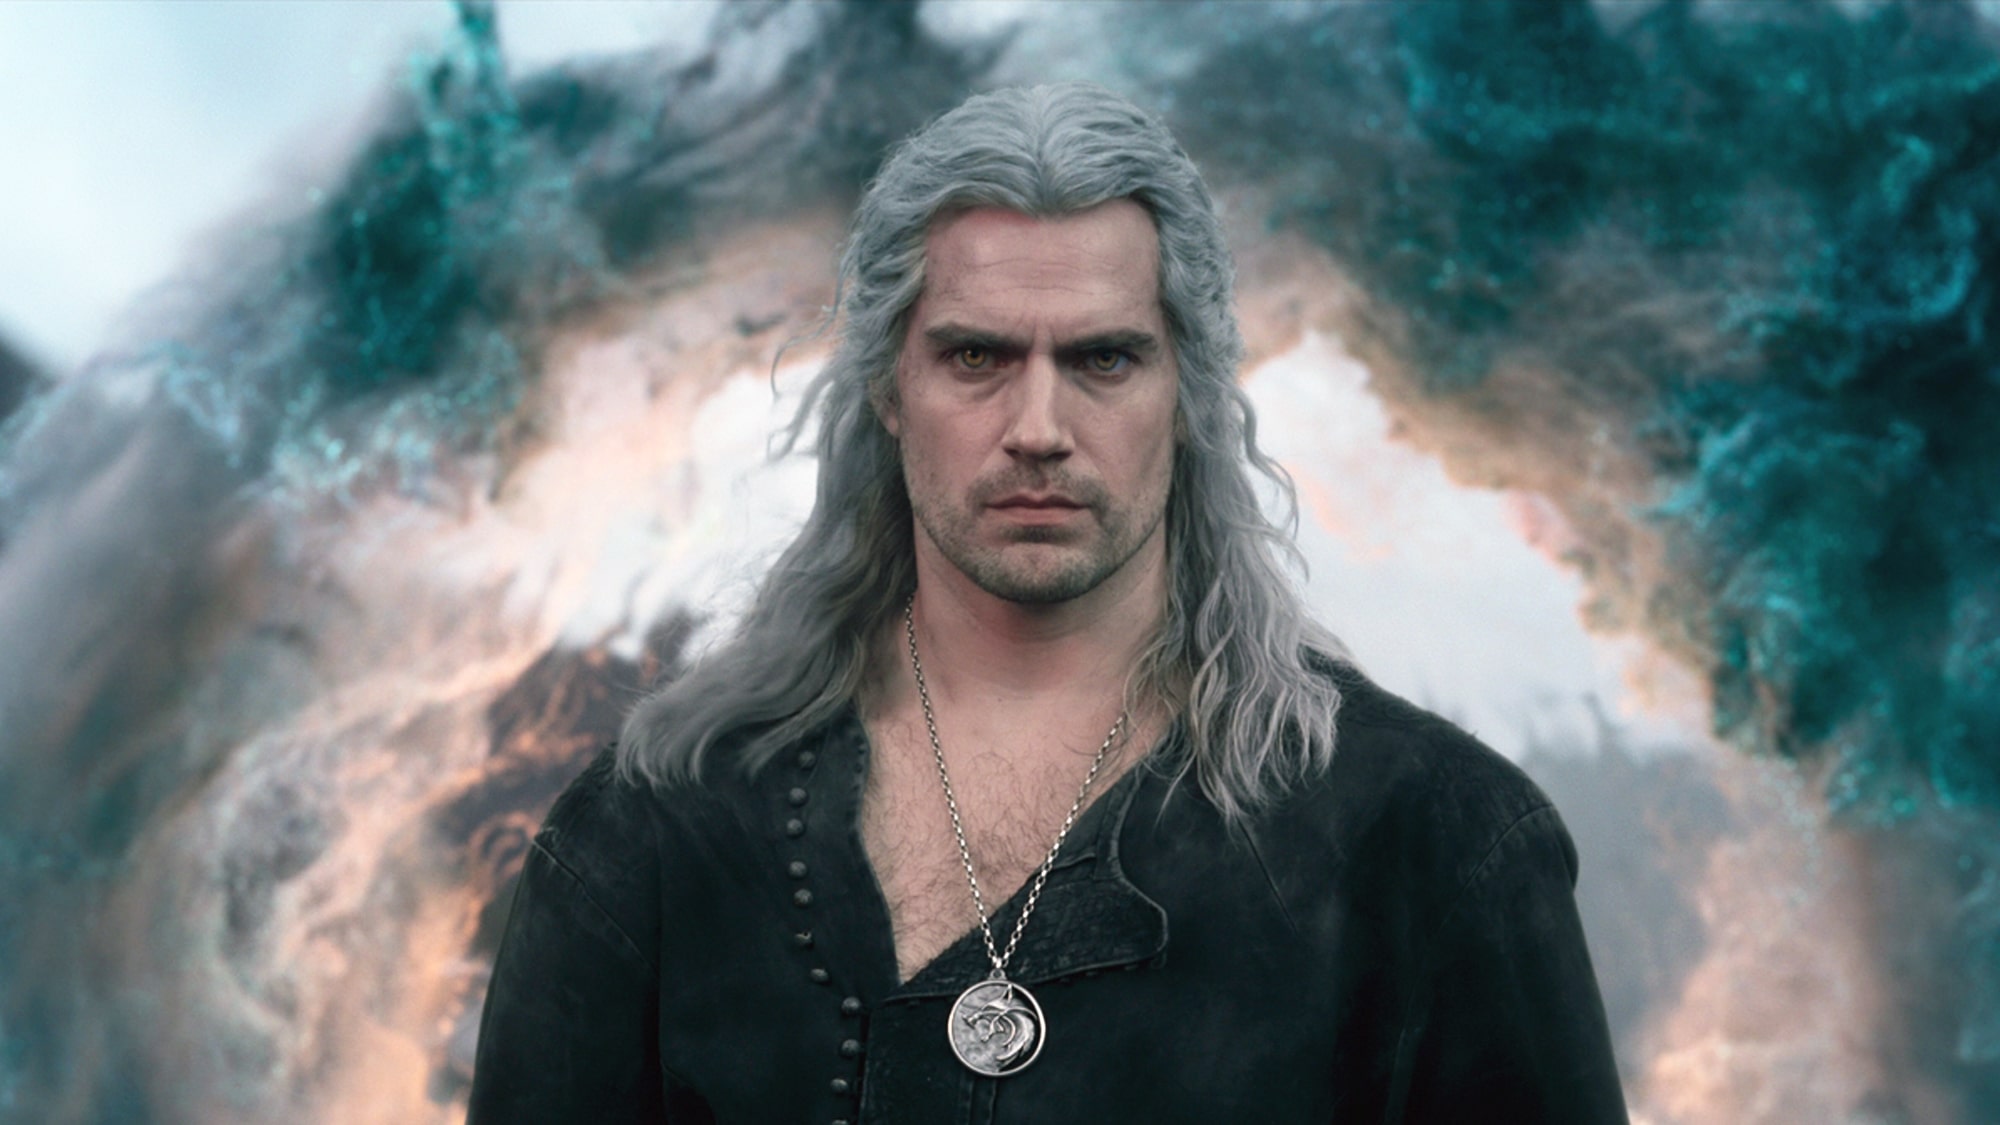 The Witcher' Season 3, Part 1 Ending, Explained: What Happened?